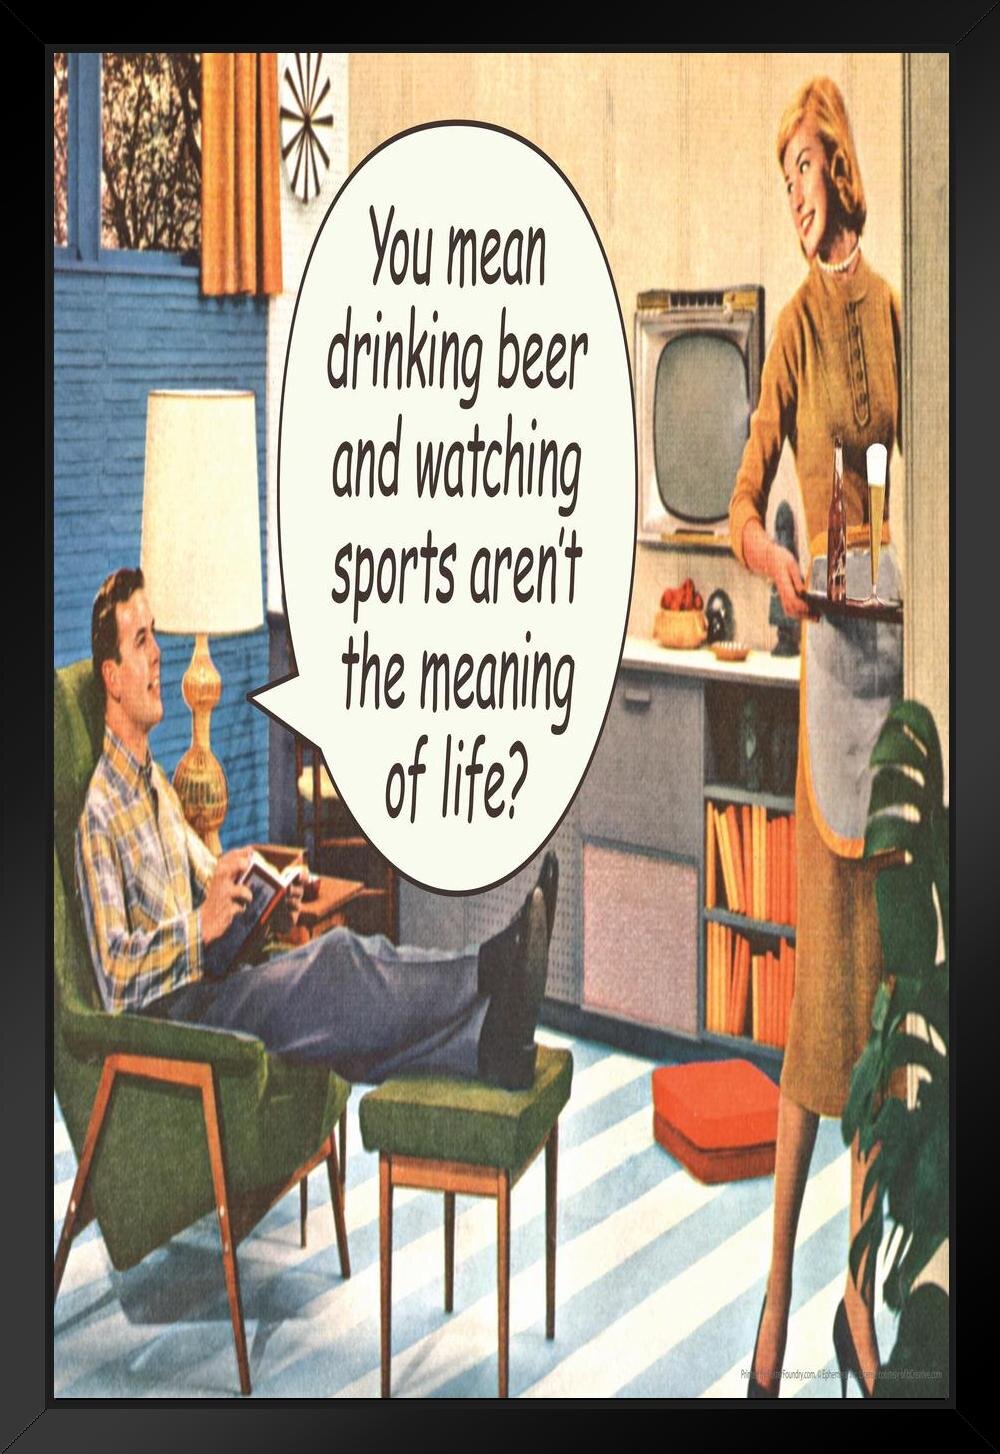 Trinx You Mean Drinking Beer & Watching Sports Arent The Meaning Of Life  Humor Retro 1950S 1960S Sassy Joke Funny Quote Ironic Campy Ephemera Black  Wood Framed Art Poster 14X20 - Picture